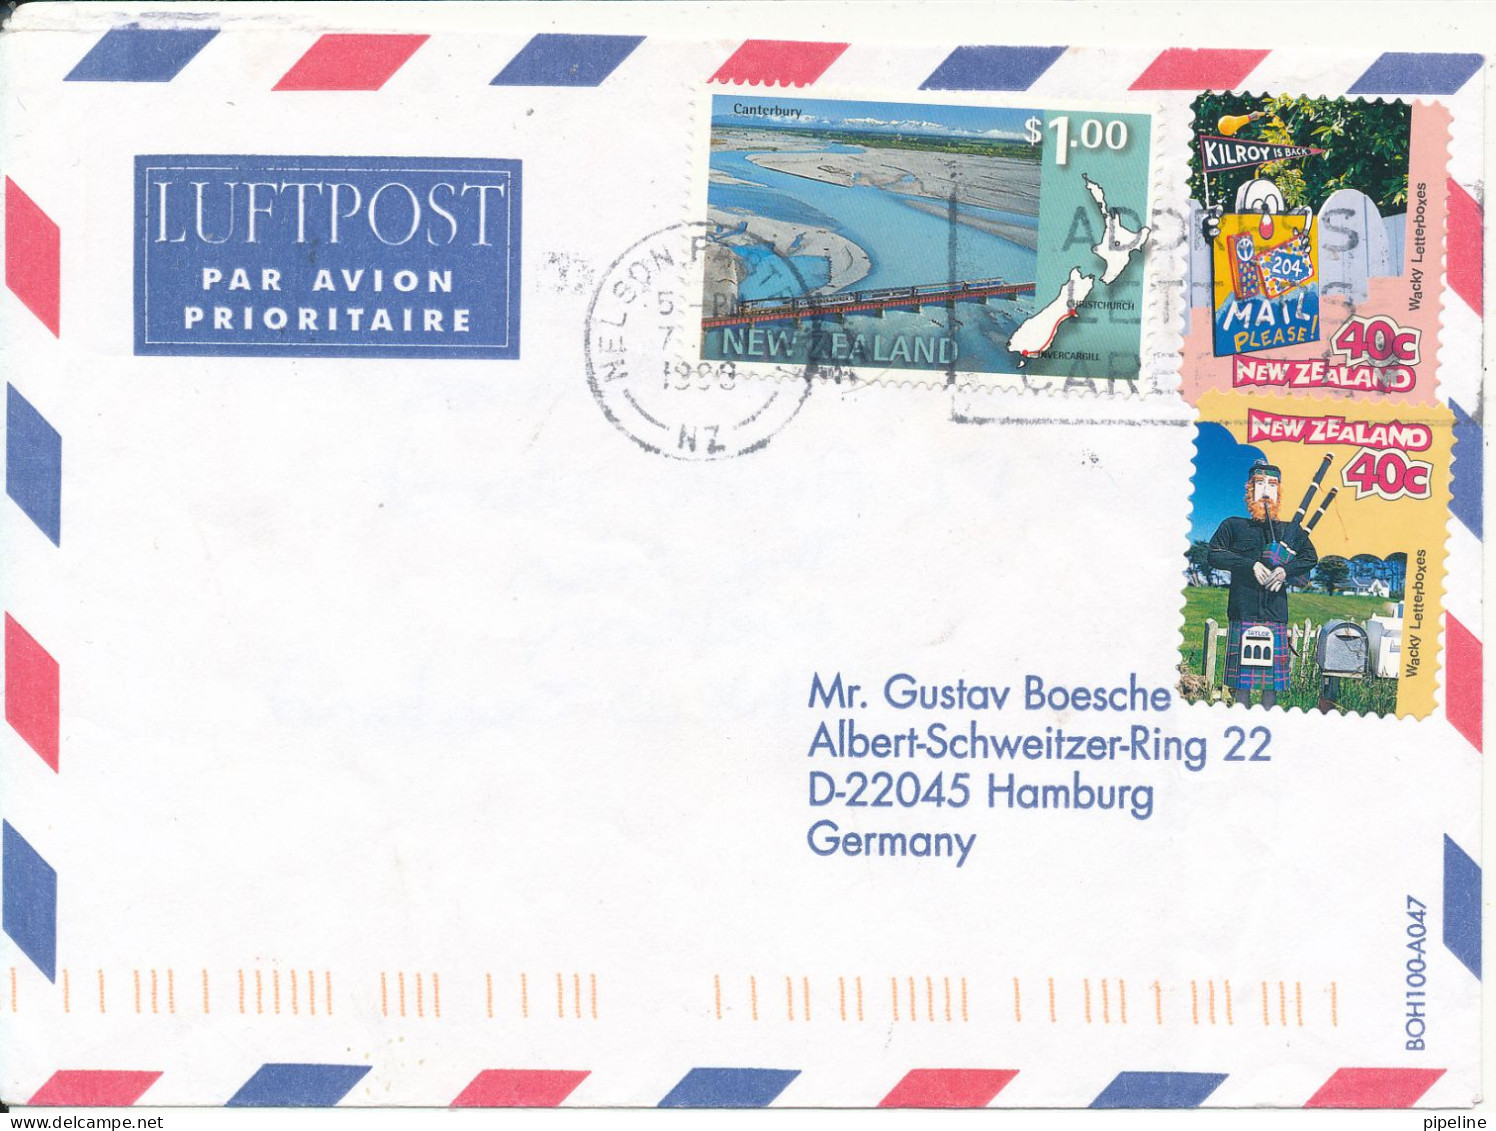 New Zealand Air Mail Cover Sent To Germany 1998 - Posta Aerea